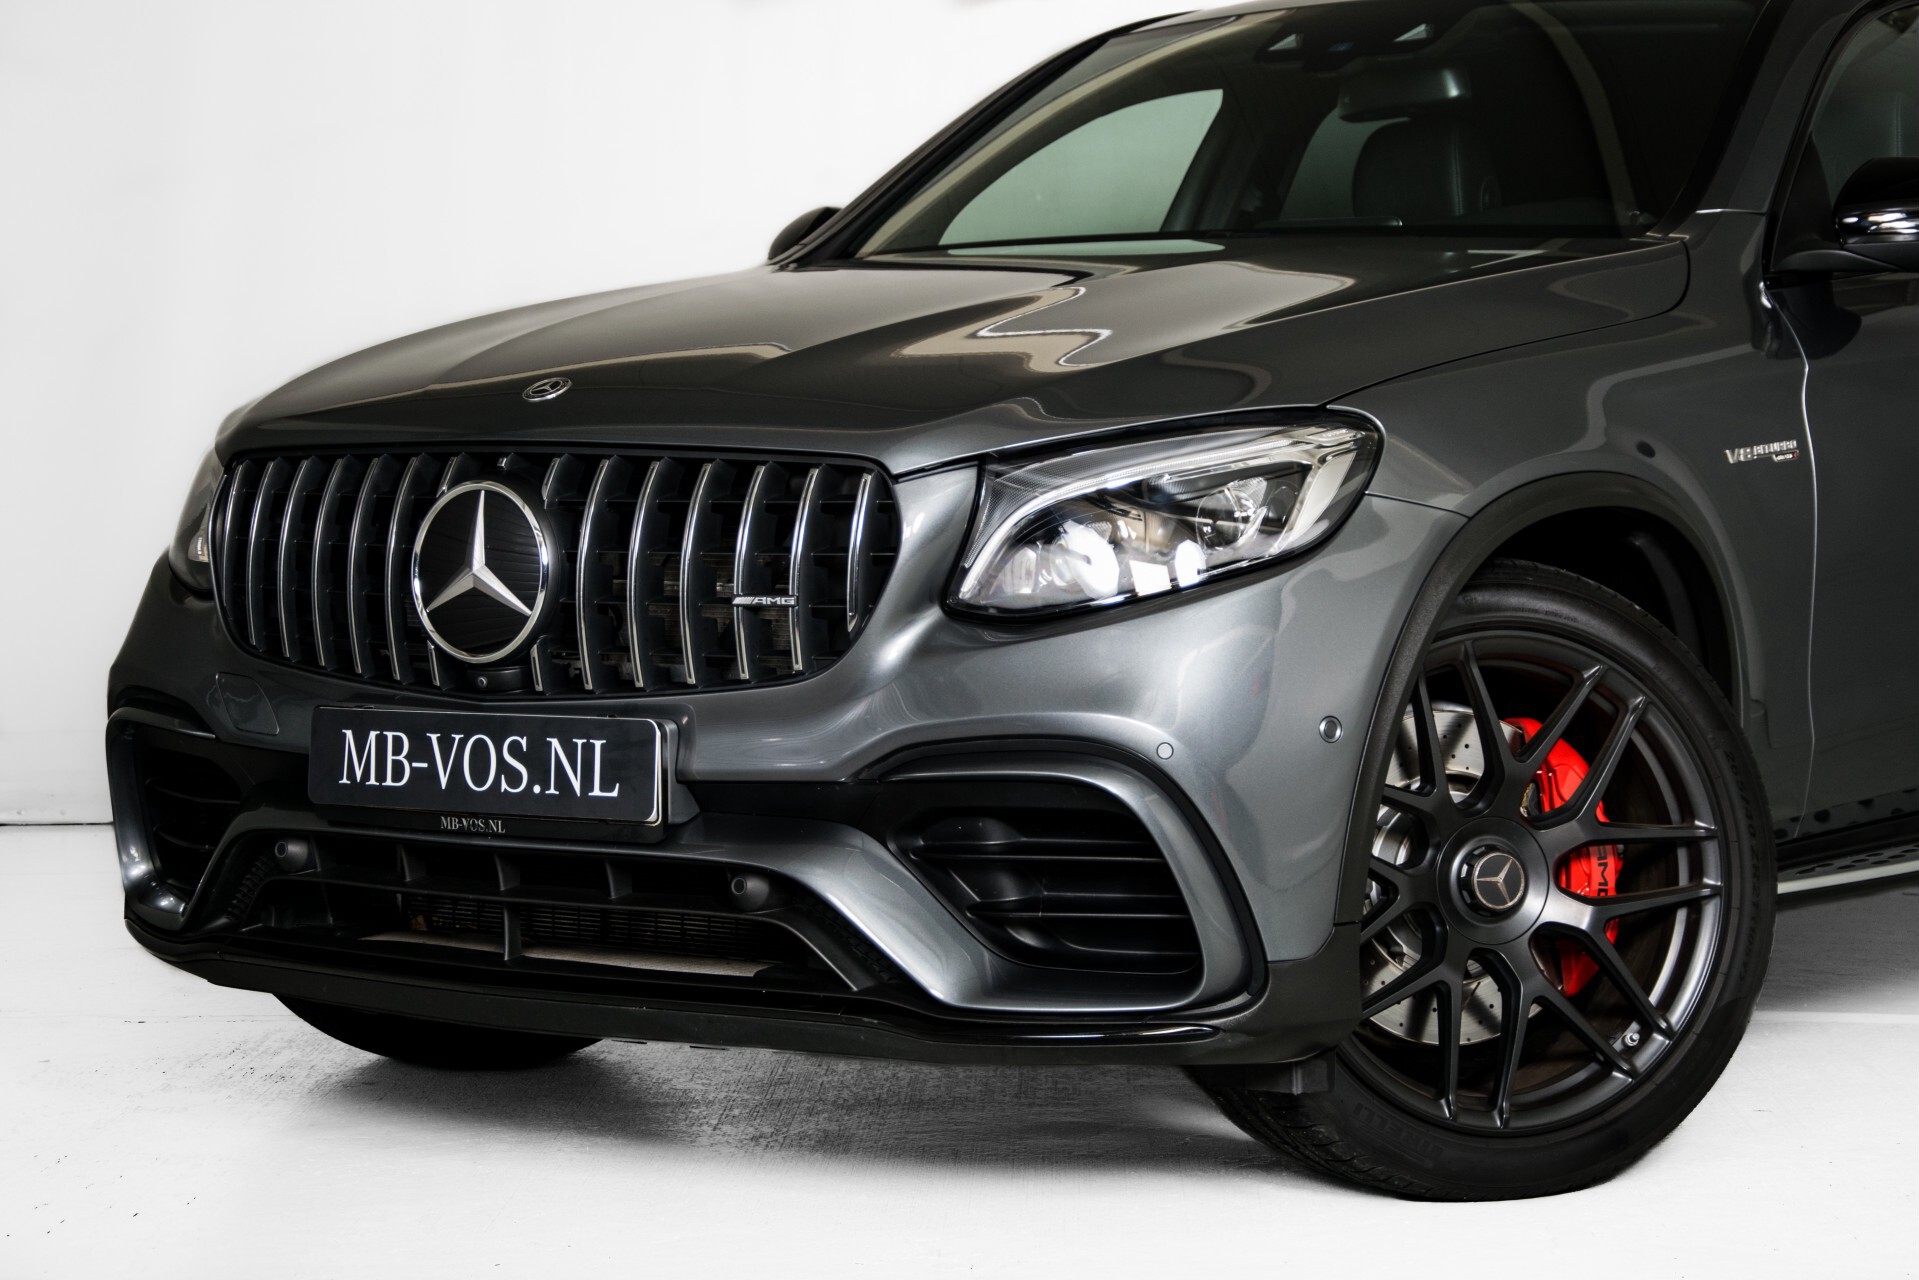 Mercedes-Benz GLC Coupé 63 S AMG 4MATIC+ Carbon/Night/Nappa/Trhk/Drivers Package Aut9 Foto 63